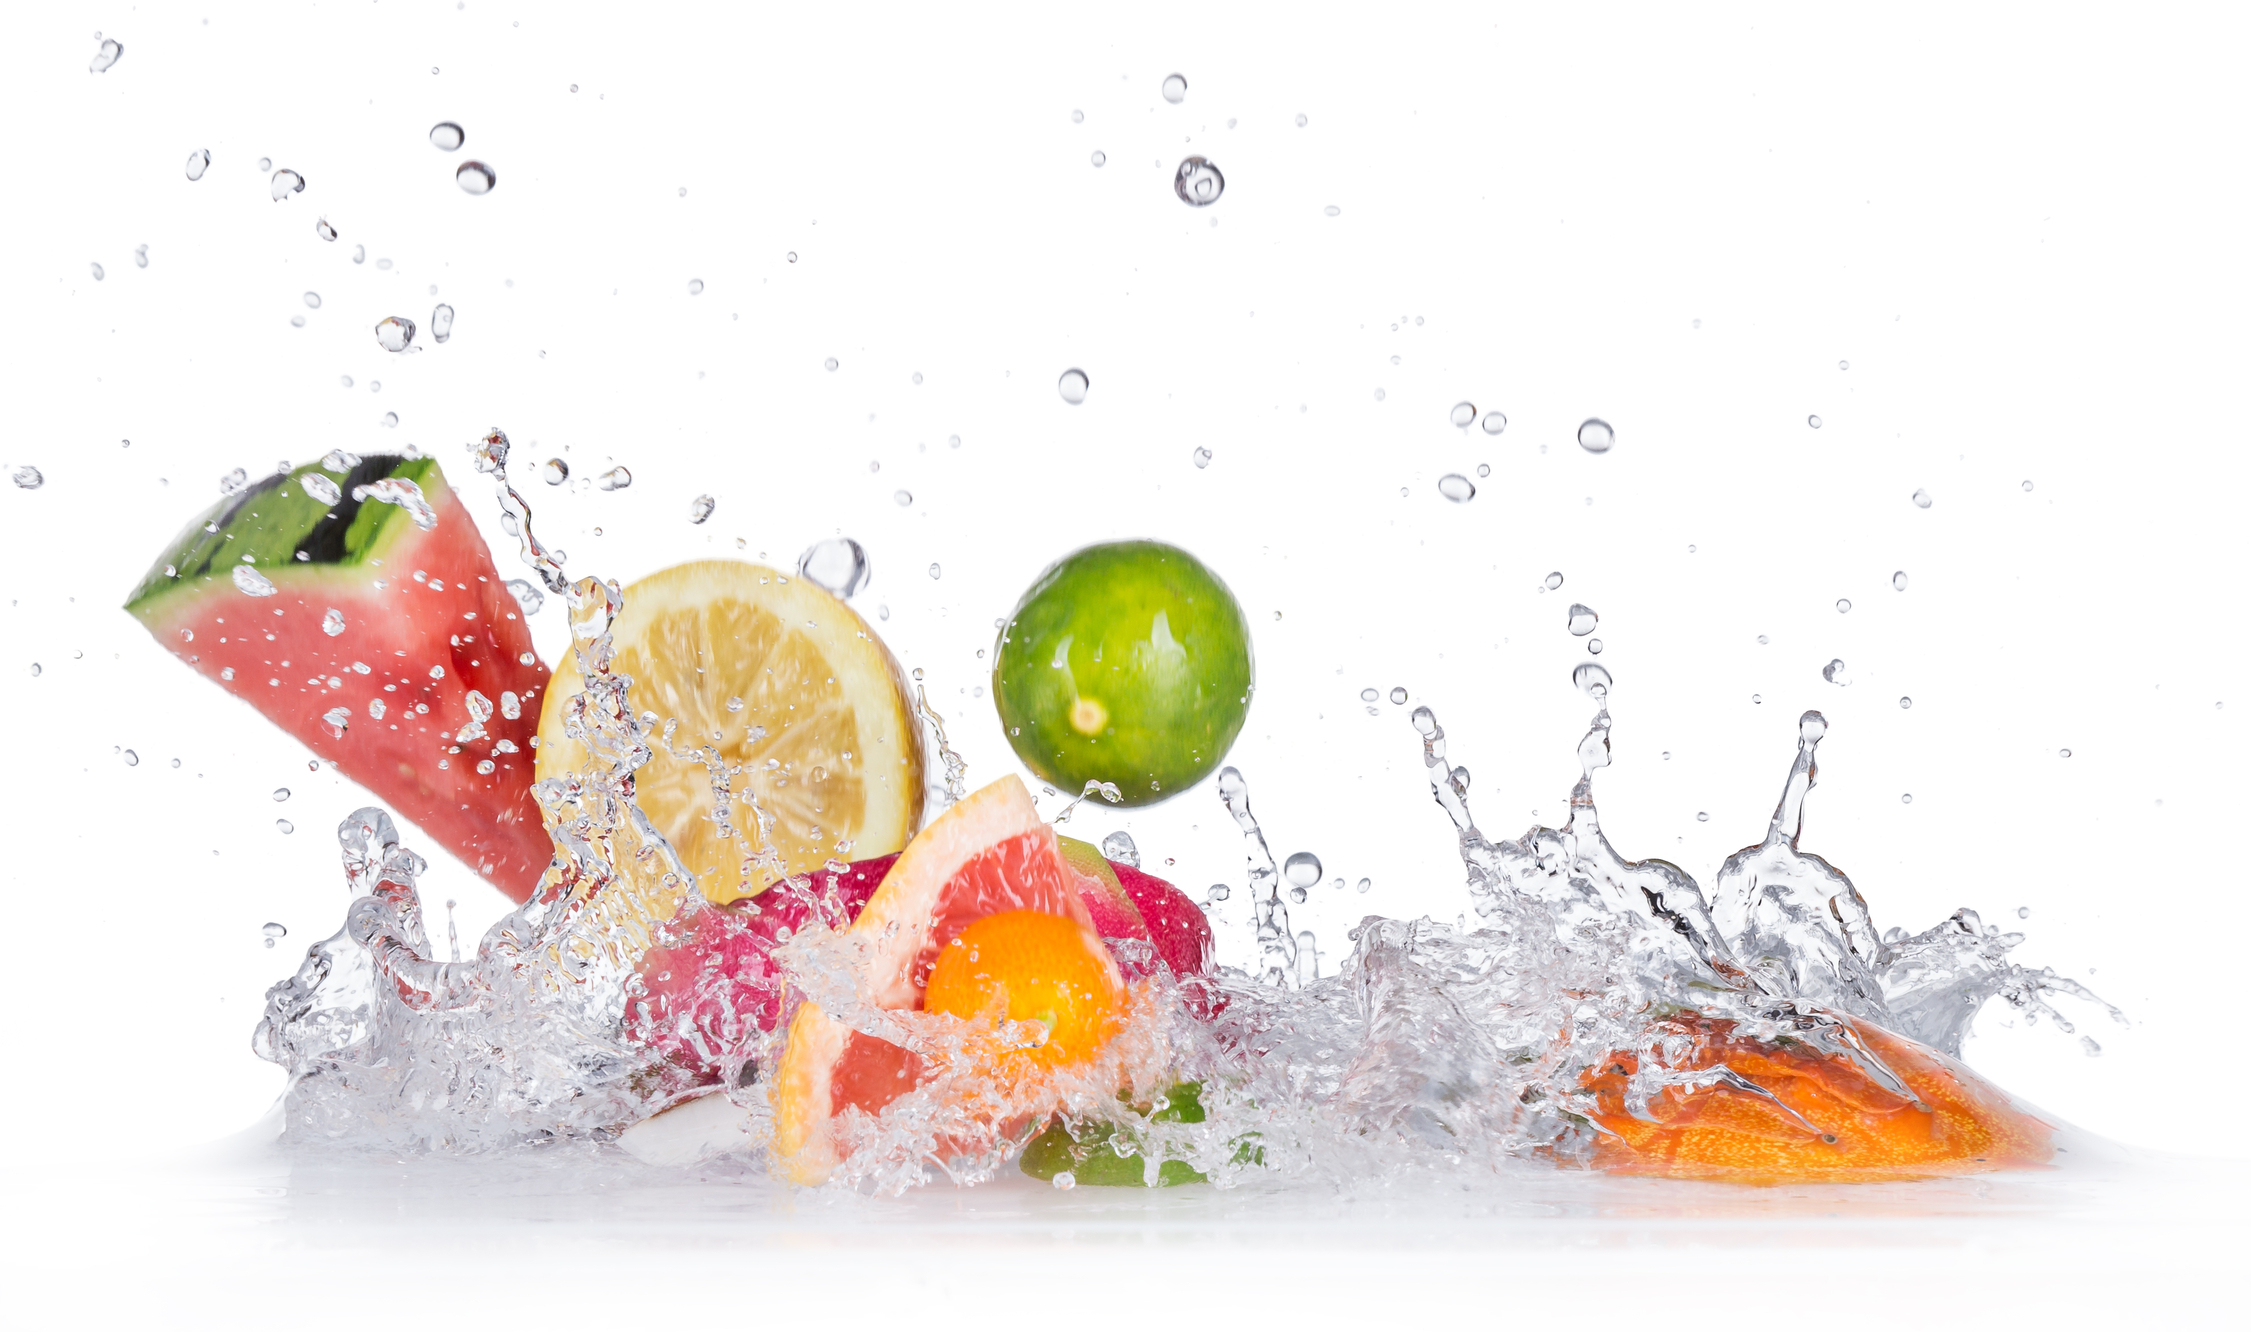 water splashing on fruits like water melon and oranges to eat and drink after a sauna session